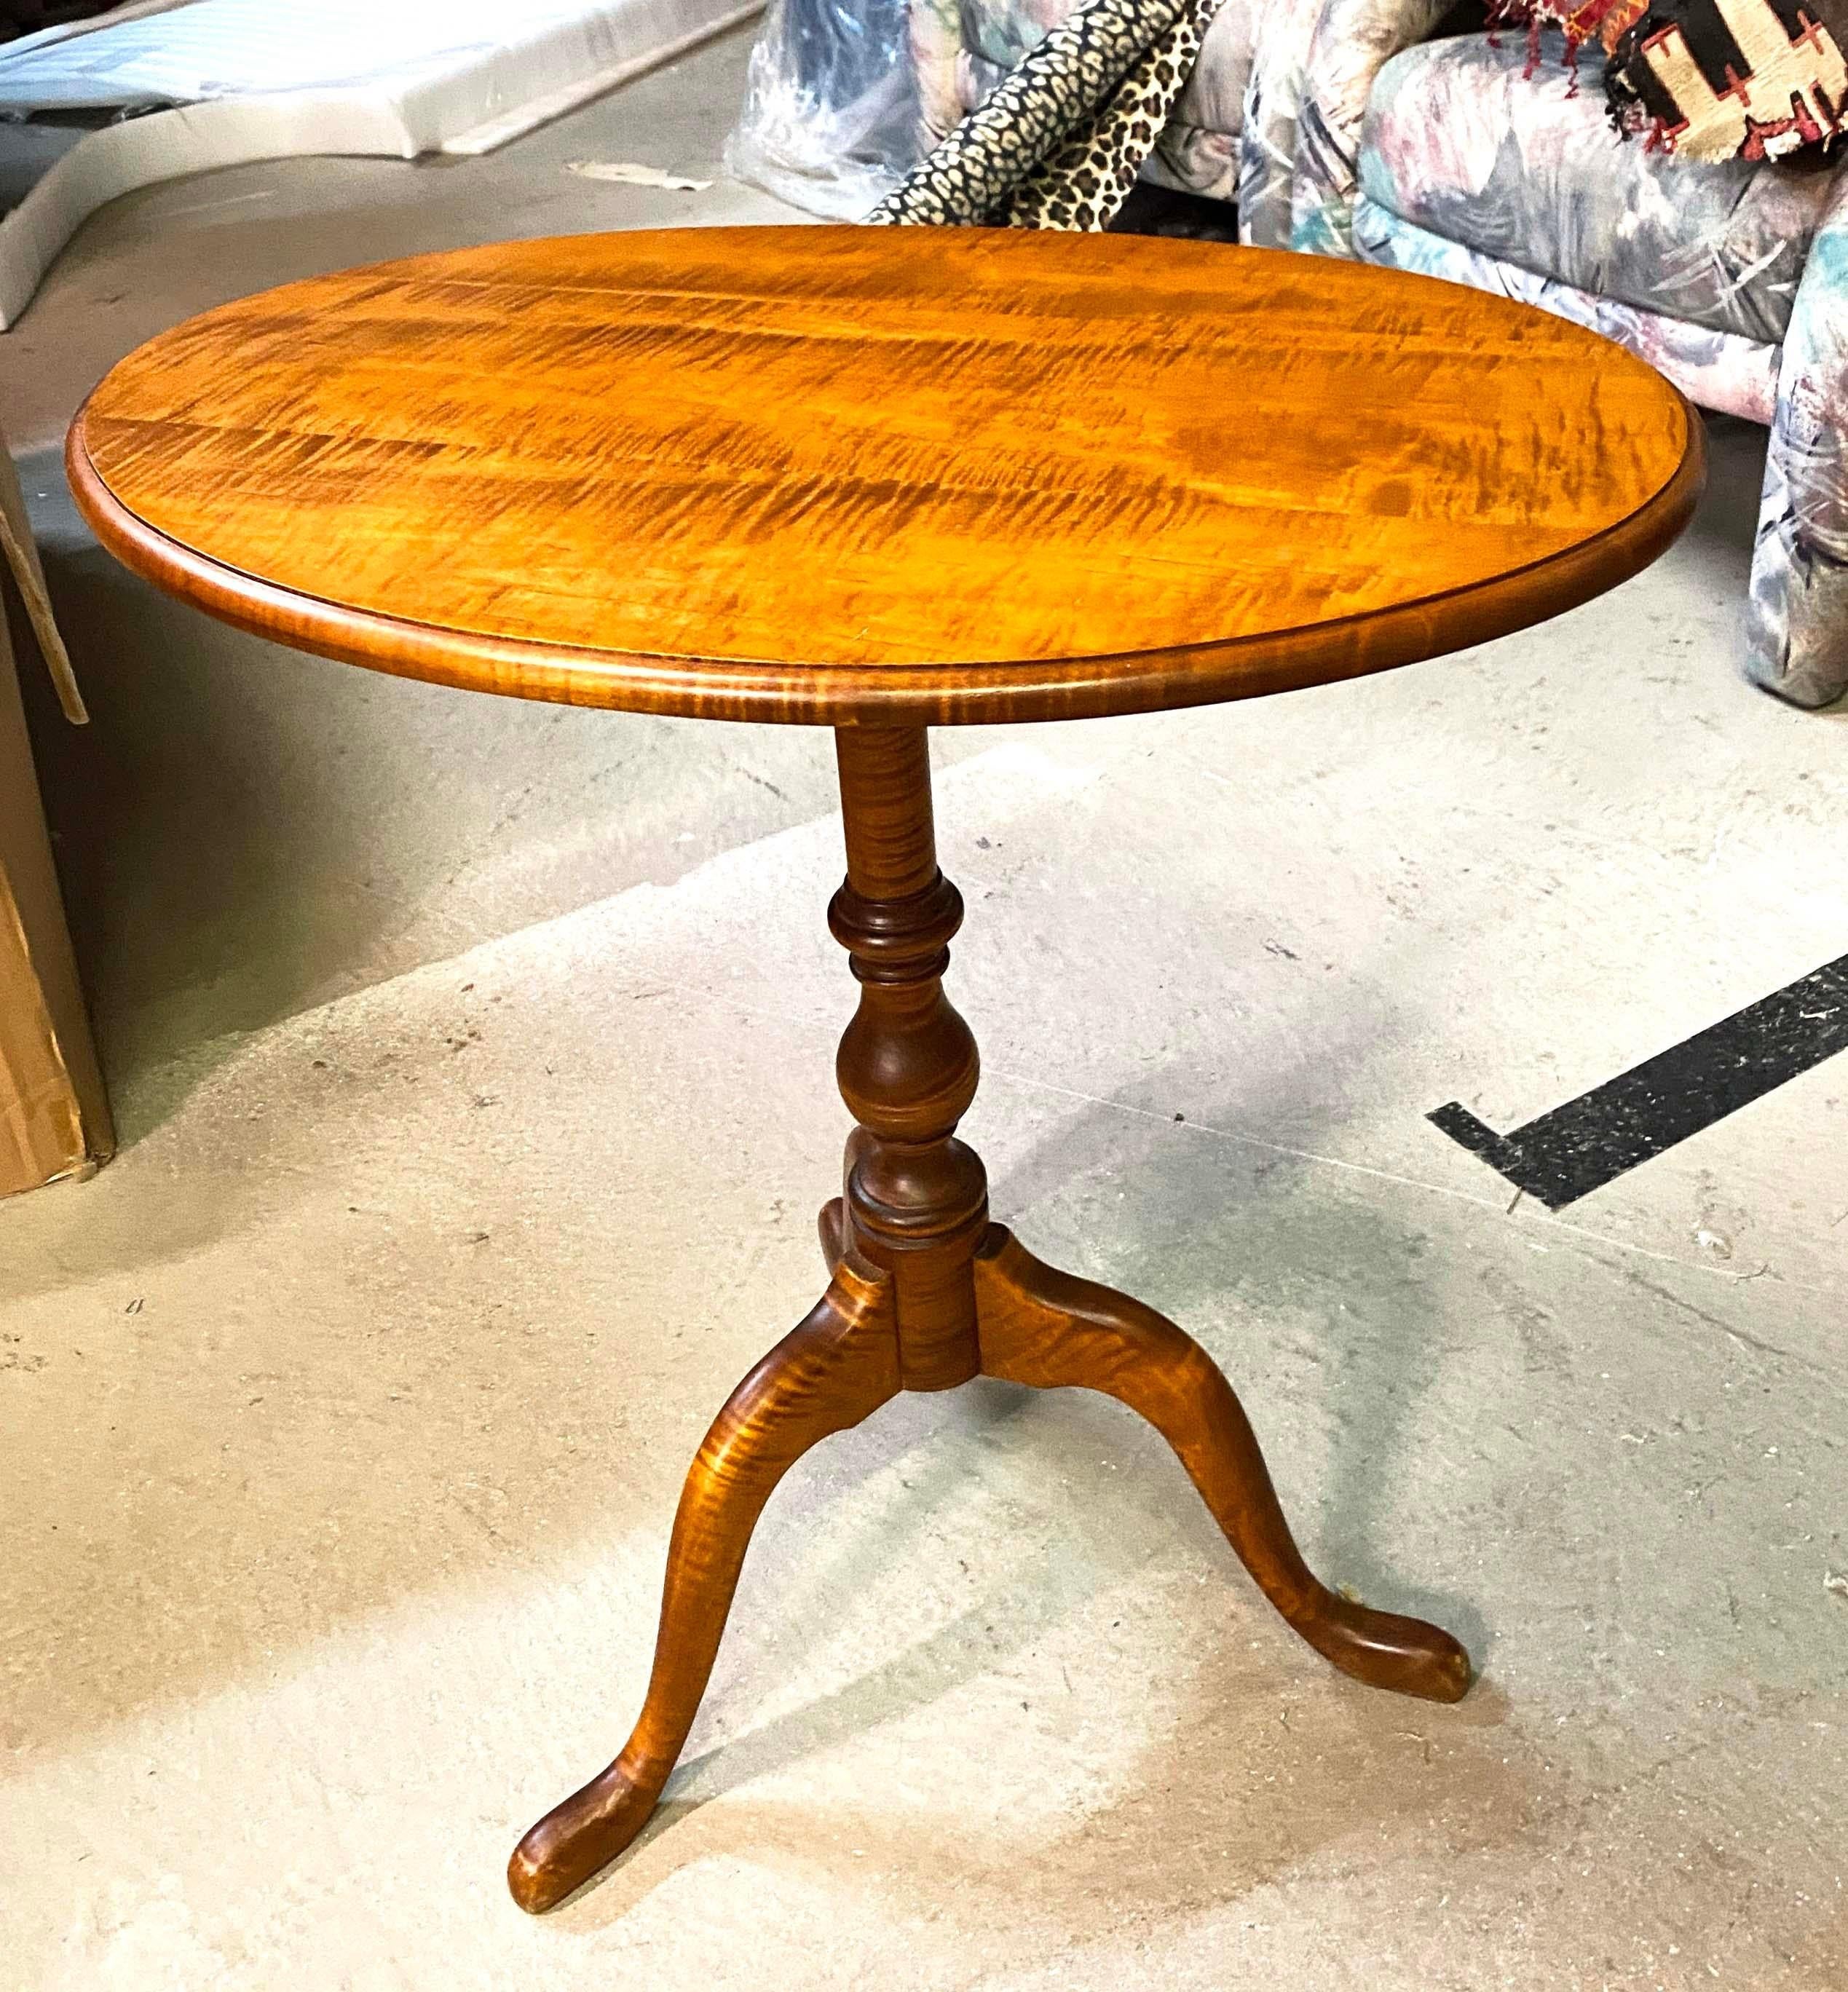 Vintage American Tiger Maple Tilt-Top Tea Table American, 20th C by Rob Roy Design in Stratham, NH 

Dimensions
27